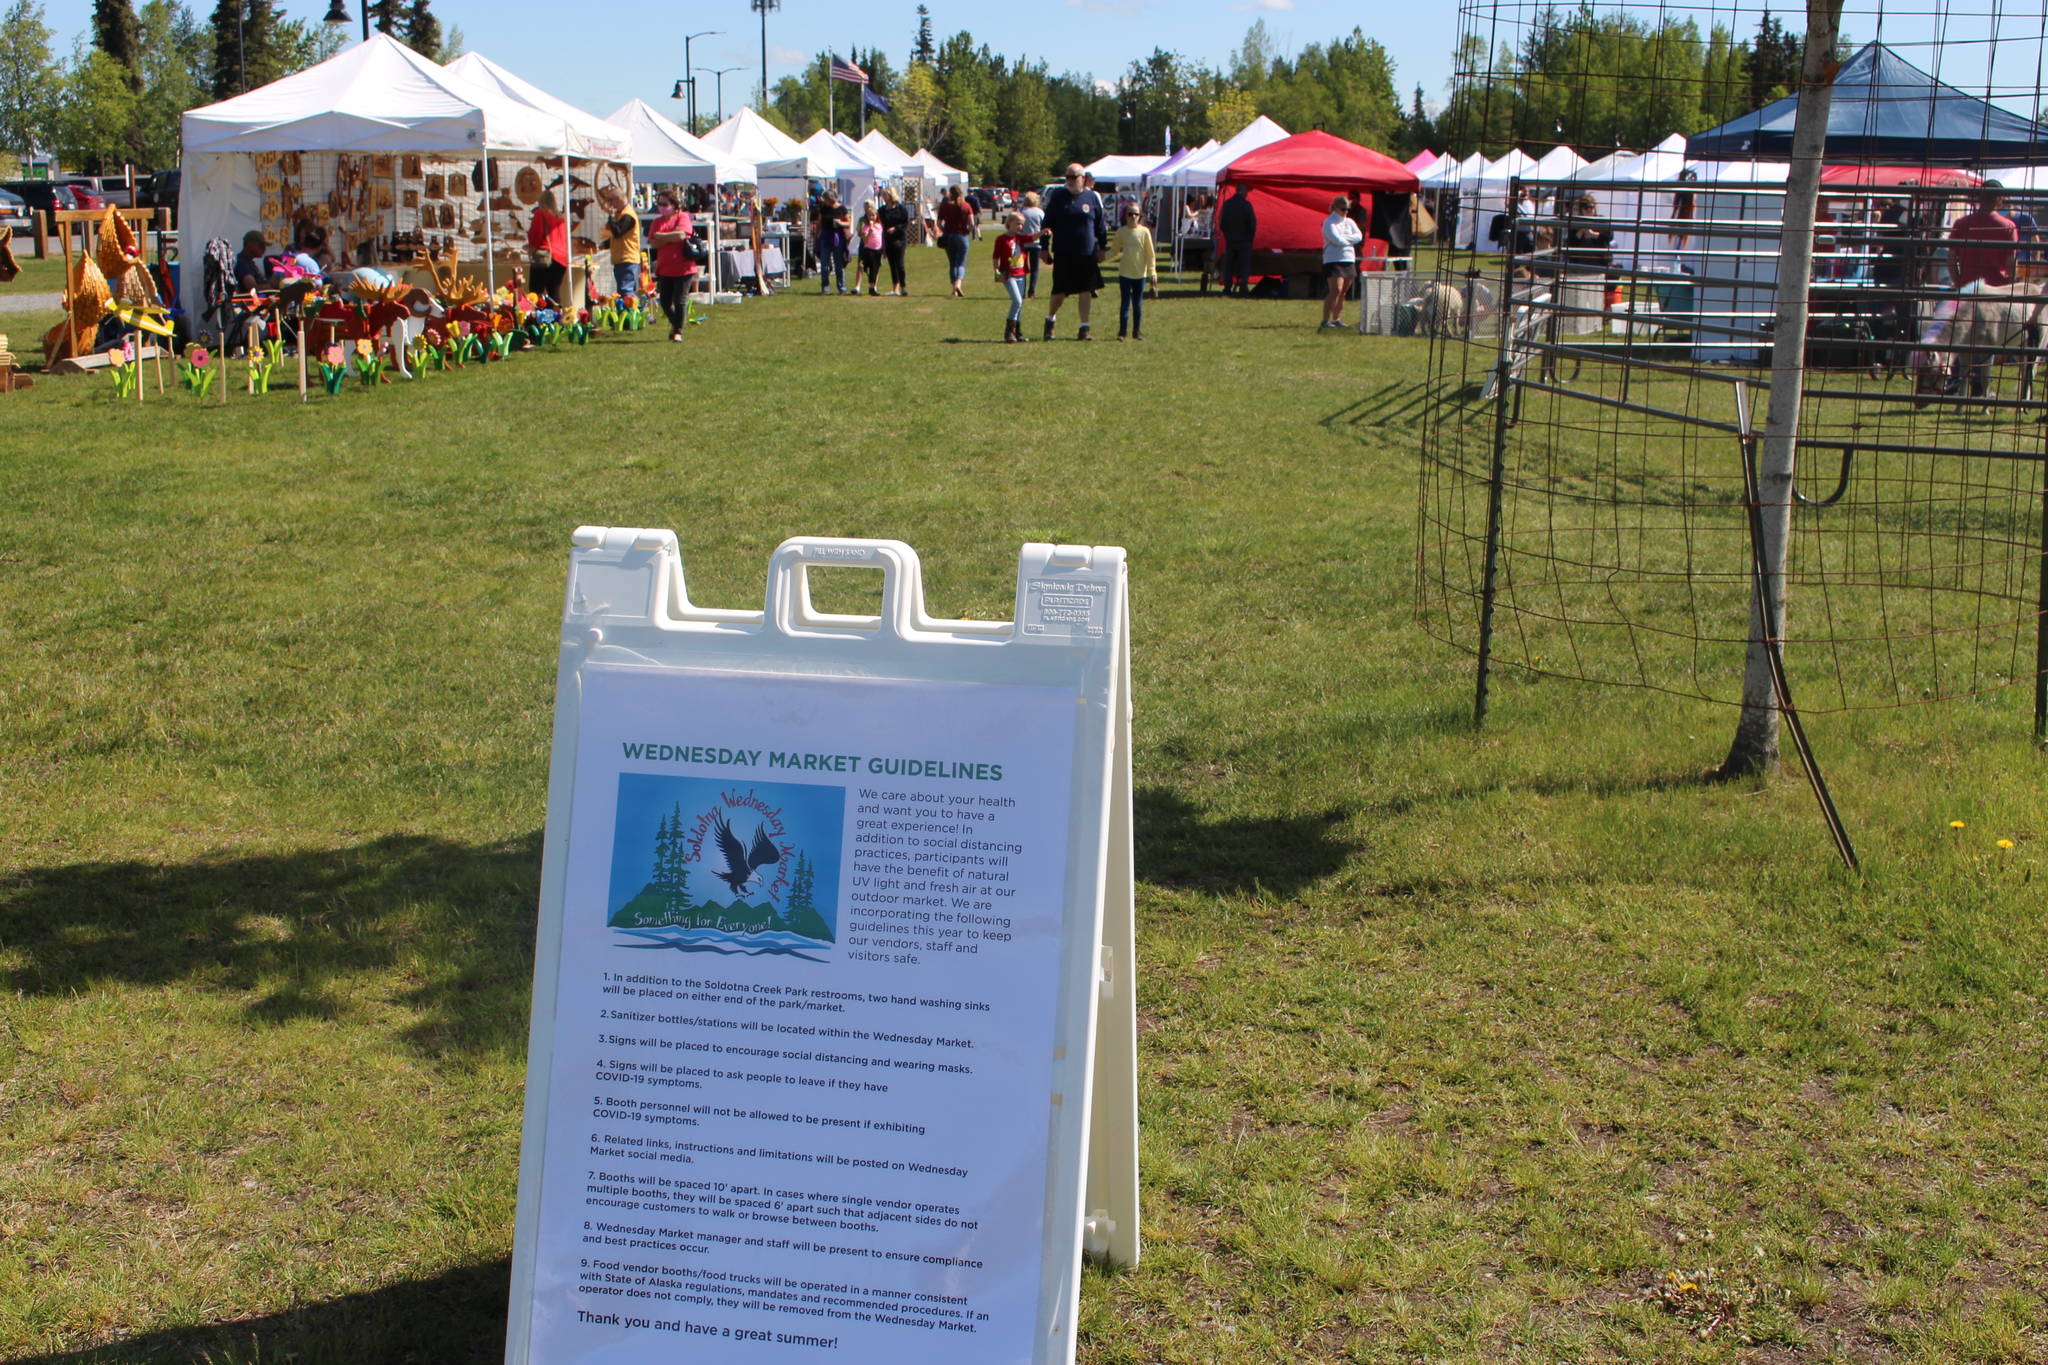 Brian Mazurek/Peninsula Clarion                                A sign detailing modified health protocols for the Wednesday Market is seen here at Soldotna Creek Park in Soldotna on June 10.